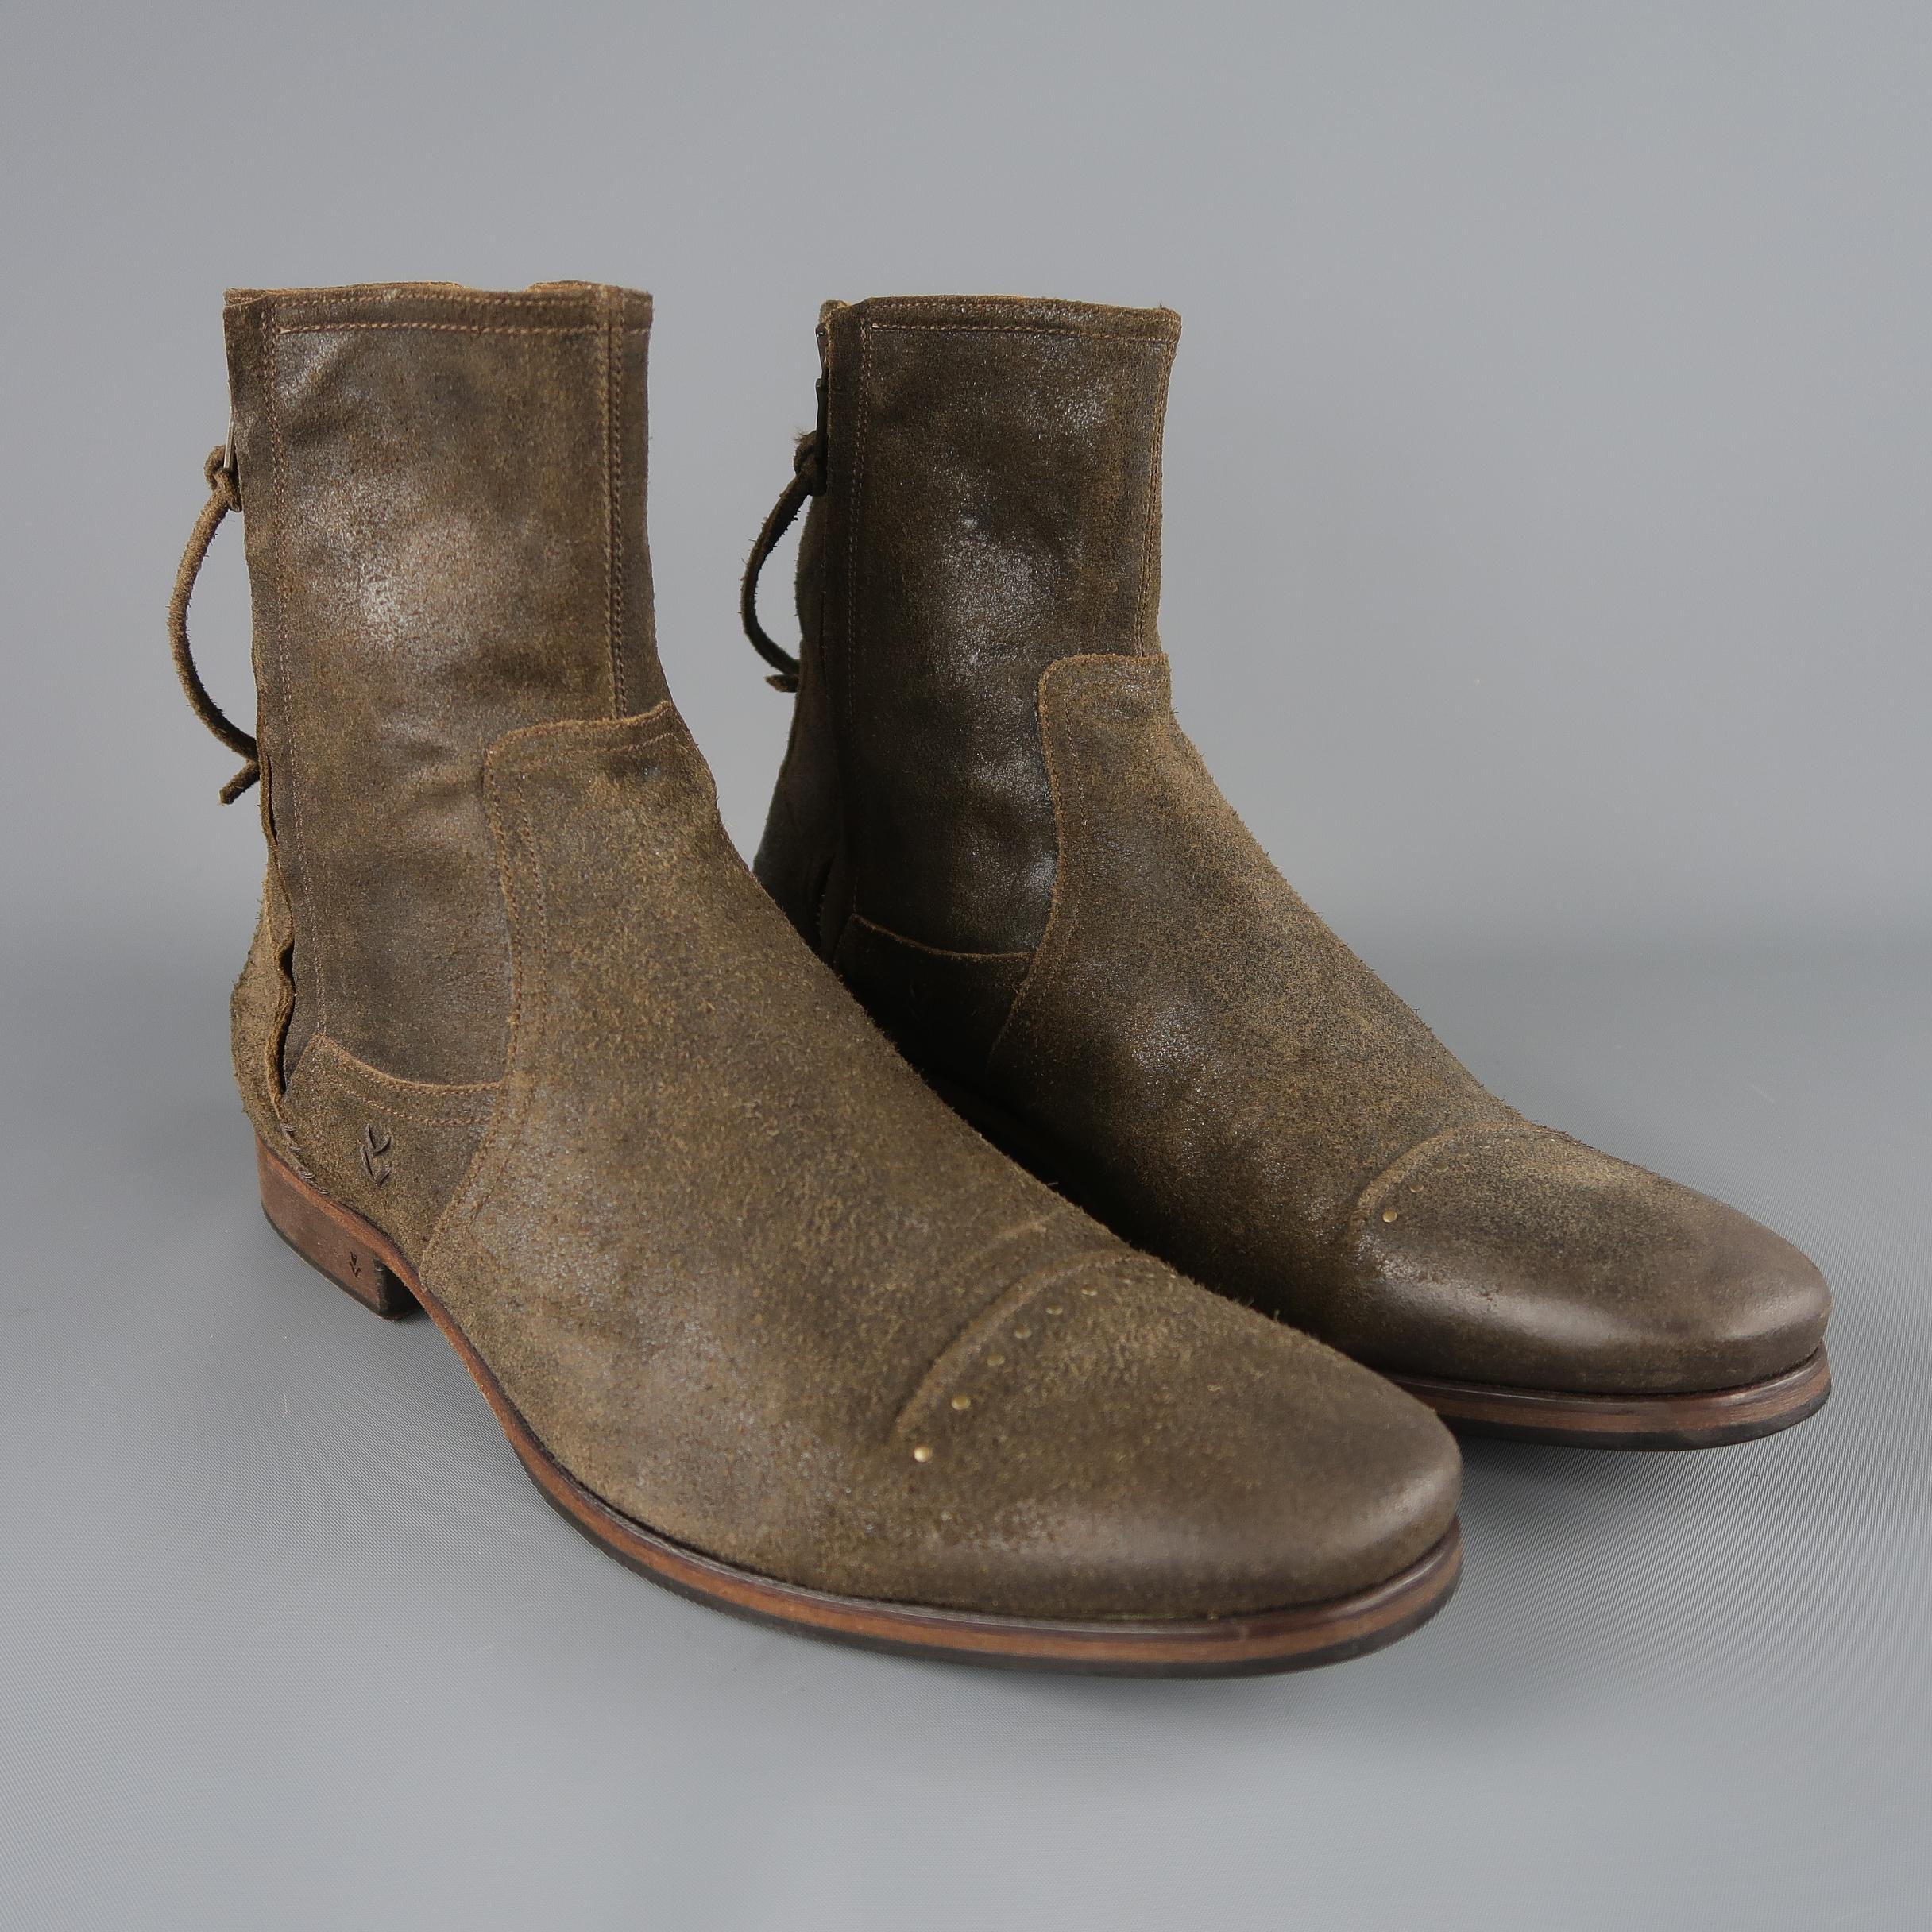 John Varvatos ankle boots come in distressed brown suede with a studded toe cap, heeled sole, and double zip shaft with tie. Handmade in Italy.   
 
Excellent Pre-Owned Condition.
Marked: 11.5
 
Measurements:
 
Length: 7 in.